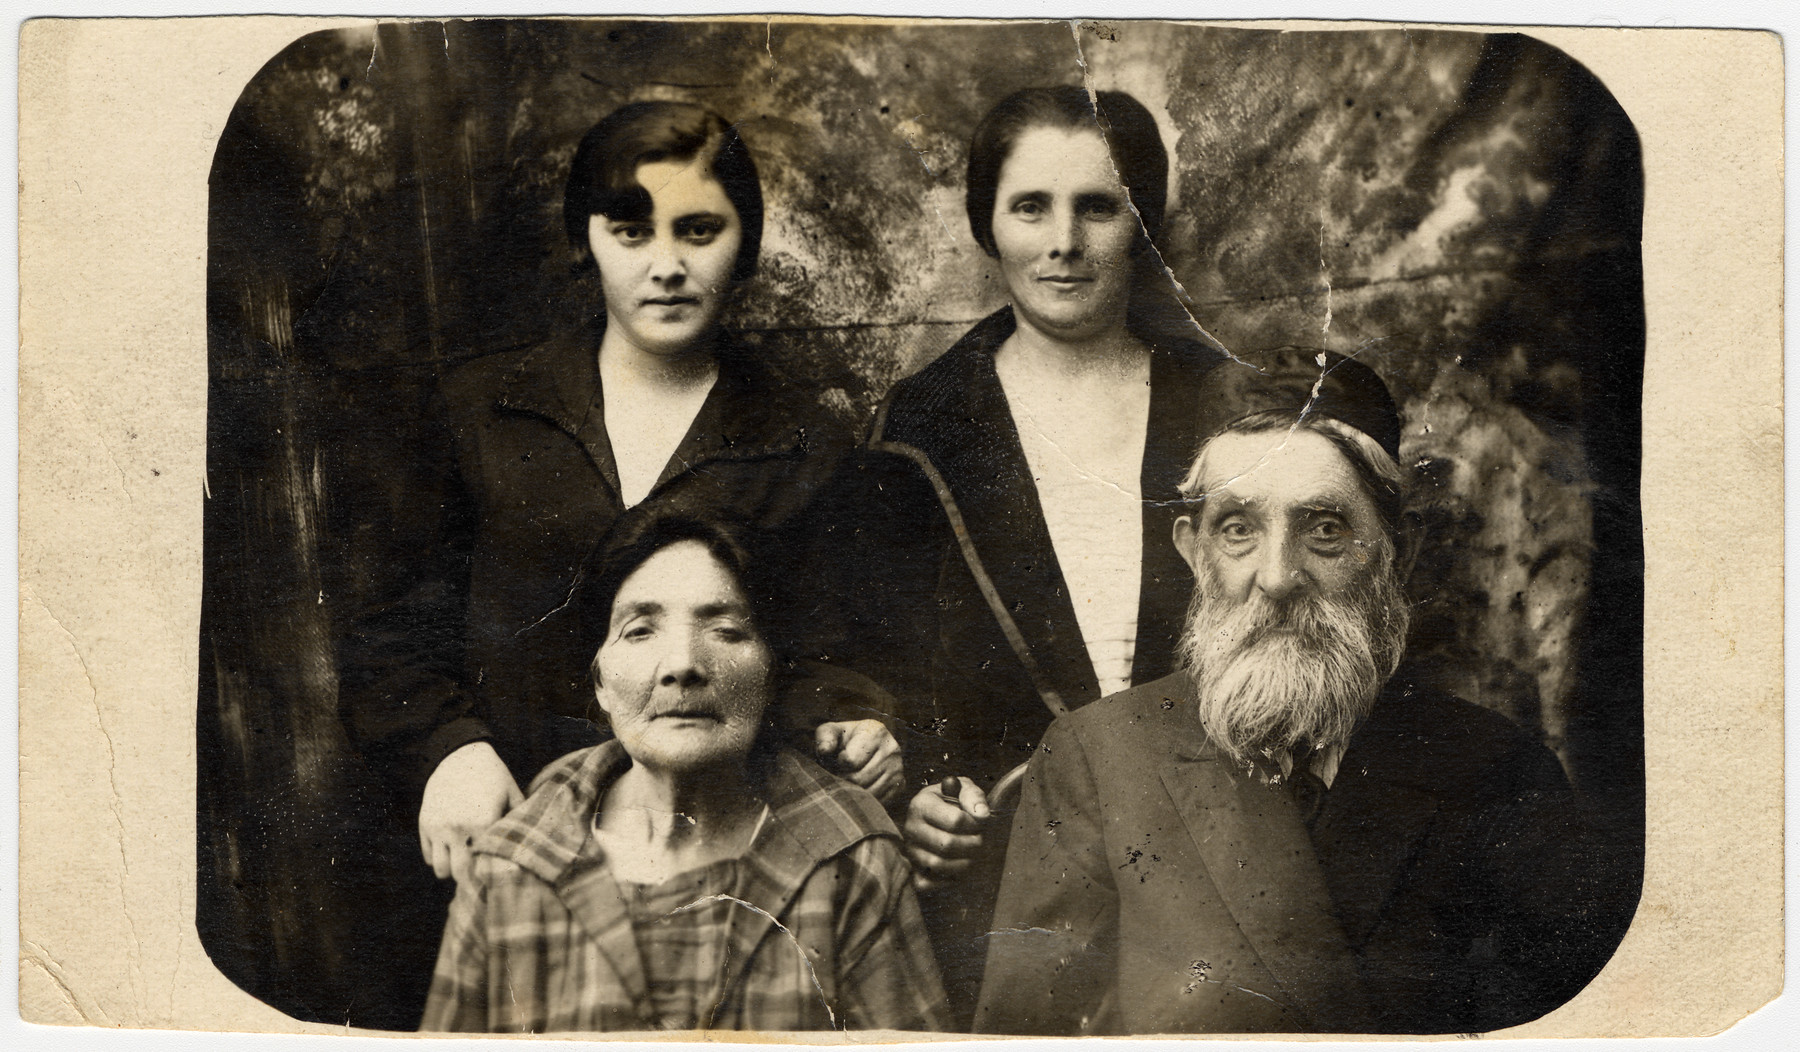 Studio portrait of three generations of the Nudelman Cycelman family.

Pictured are Slava Nudelman and third husband, Sonja Cygelman and Rachel Nudelman Cygelman.  Rachel is Slava's daughter and Sonja's mother.